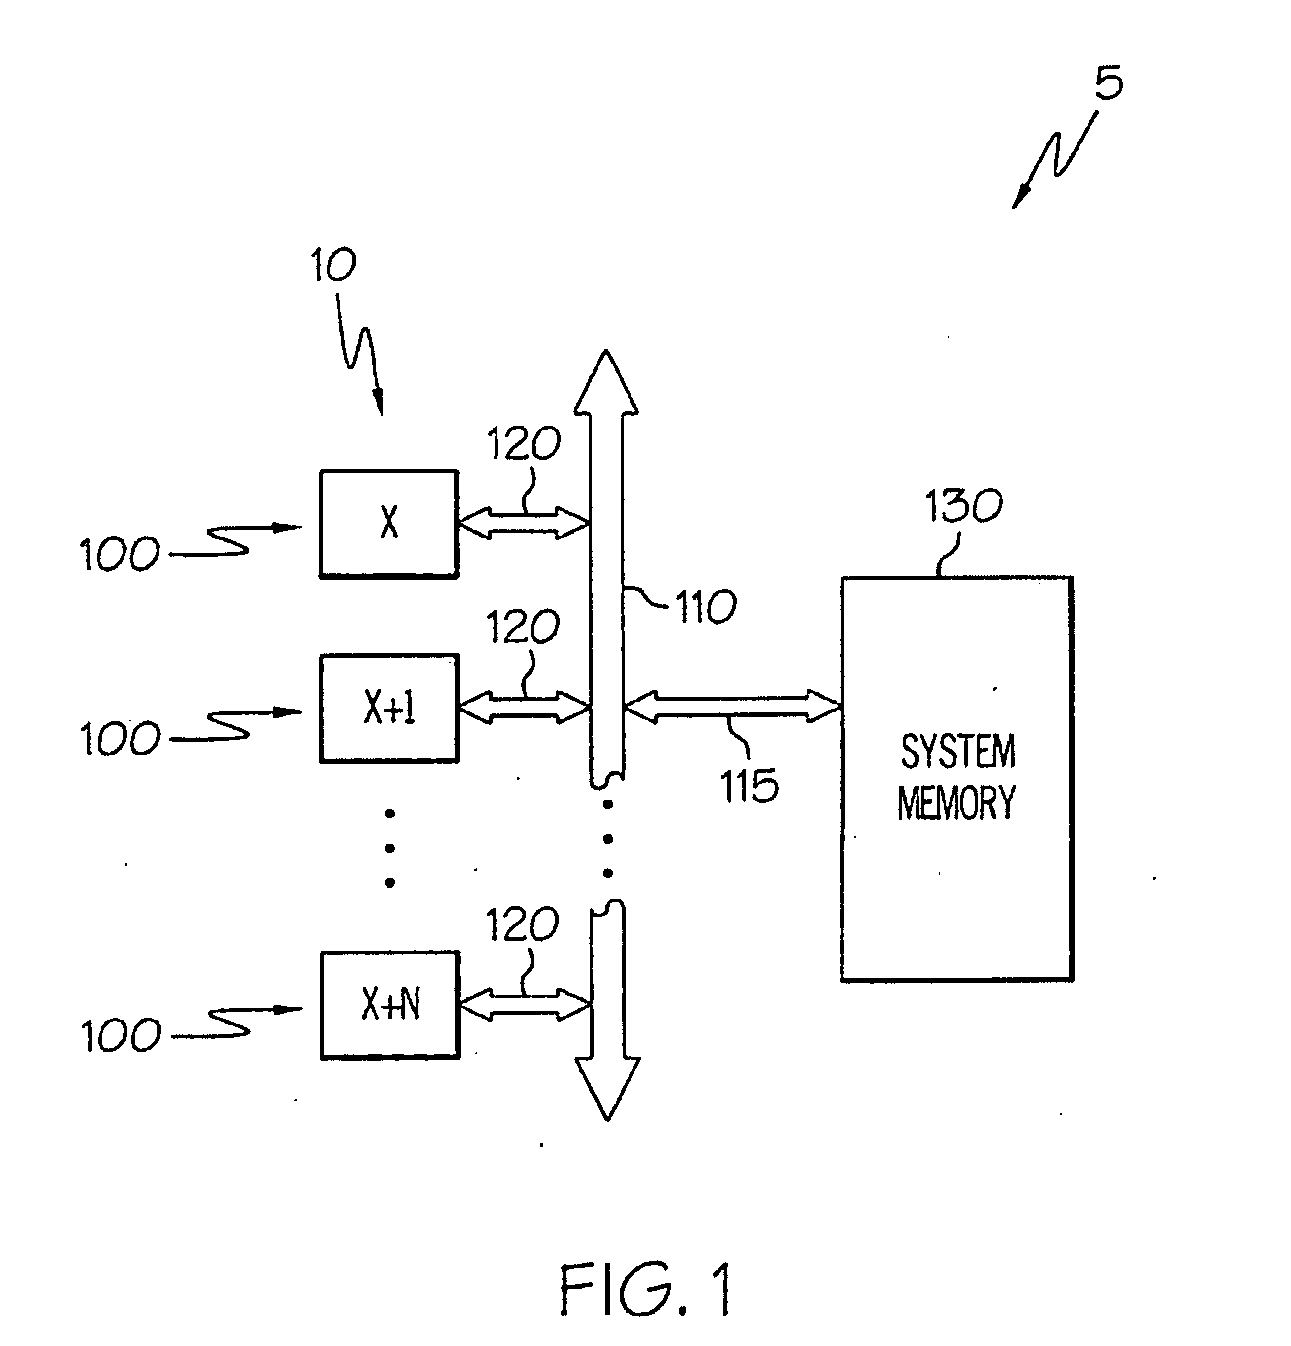 Region coherence array having hint bits for a clustered shared-memory multiprocessor system